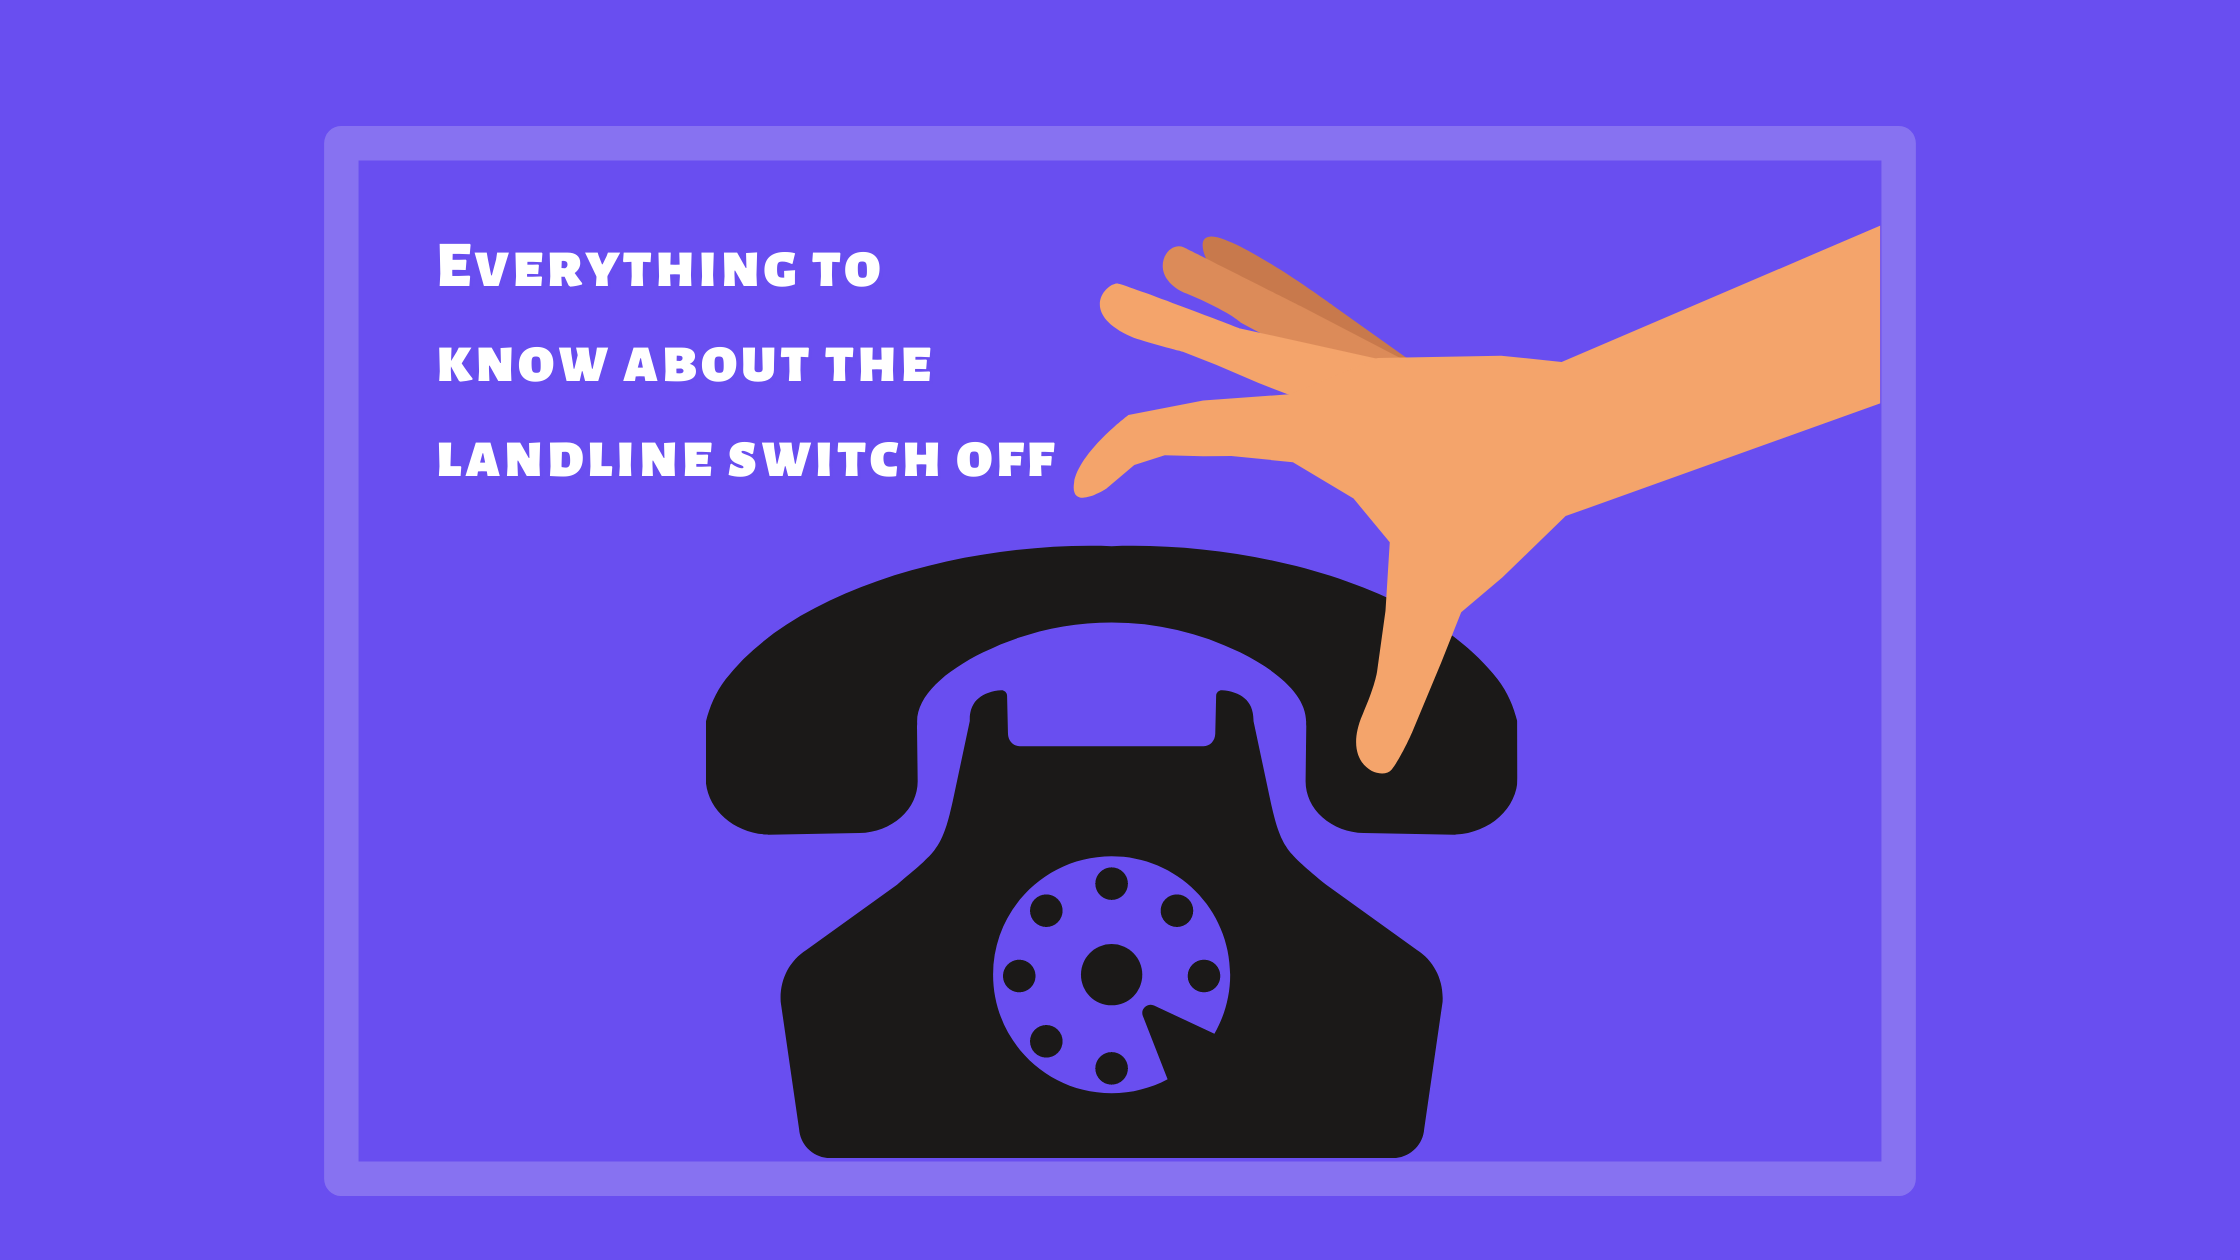 Purple background with graphic of a landline phone and a hand pick up the receiver